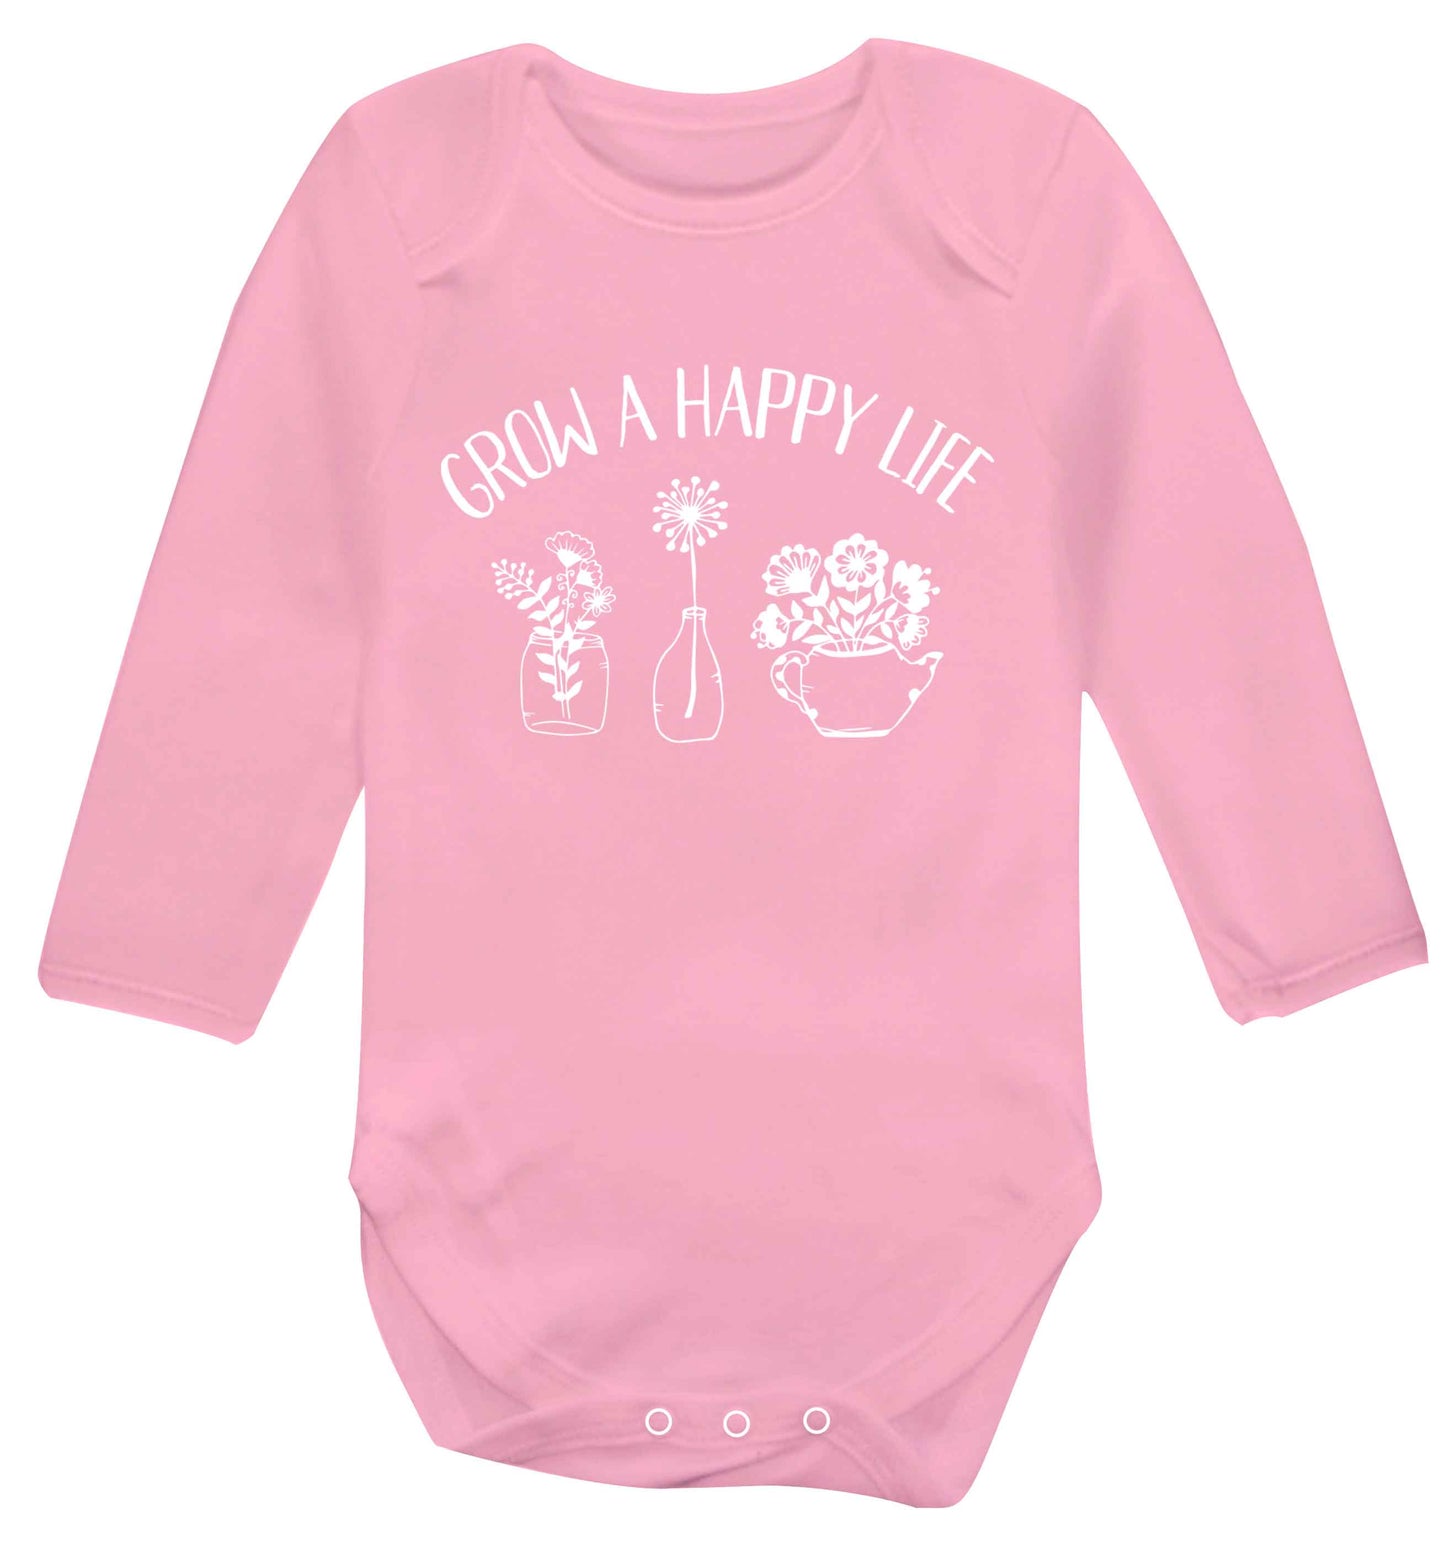 Grow a happy life Baby Vest long sleeved pale pink 6-12 months